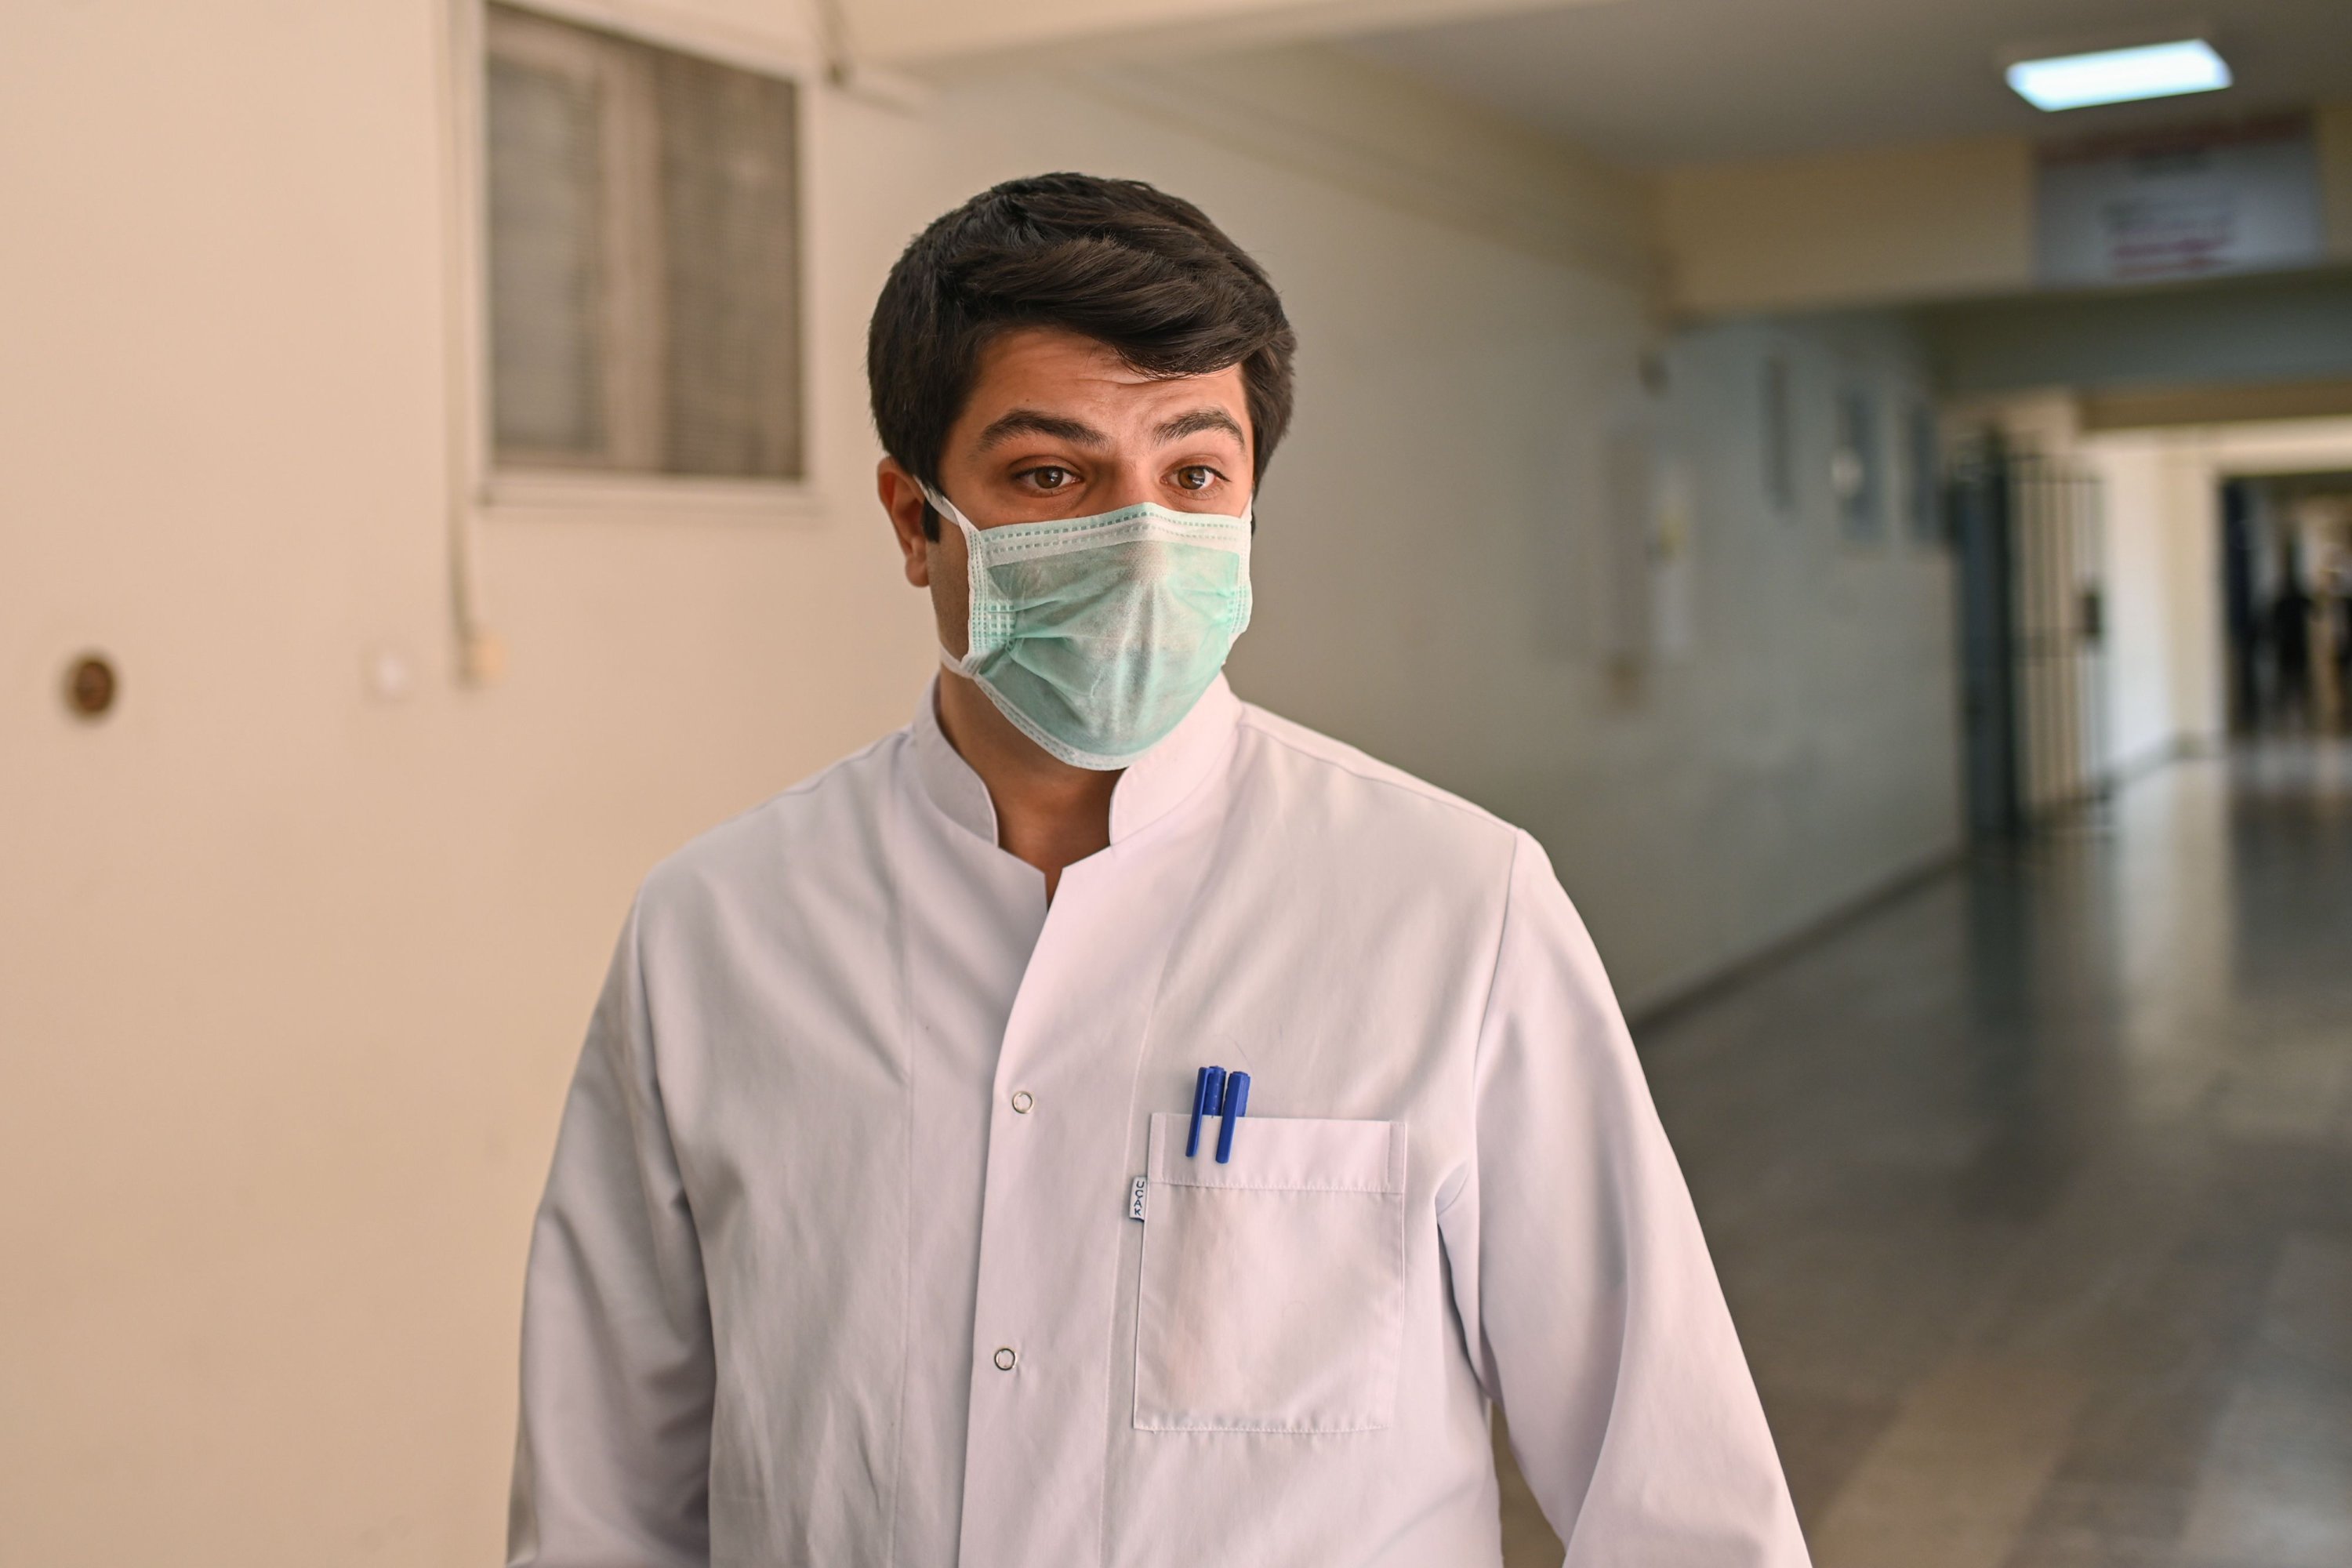 Furkan Aydın, 28-year old physician associate who treats COVID-19 patients, poses during an interview.